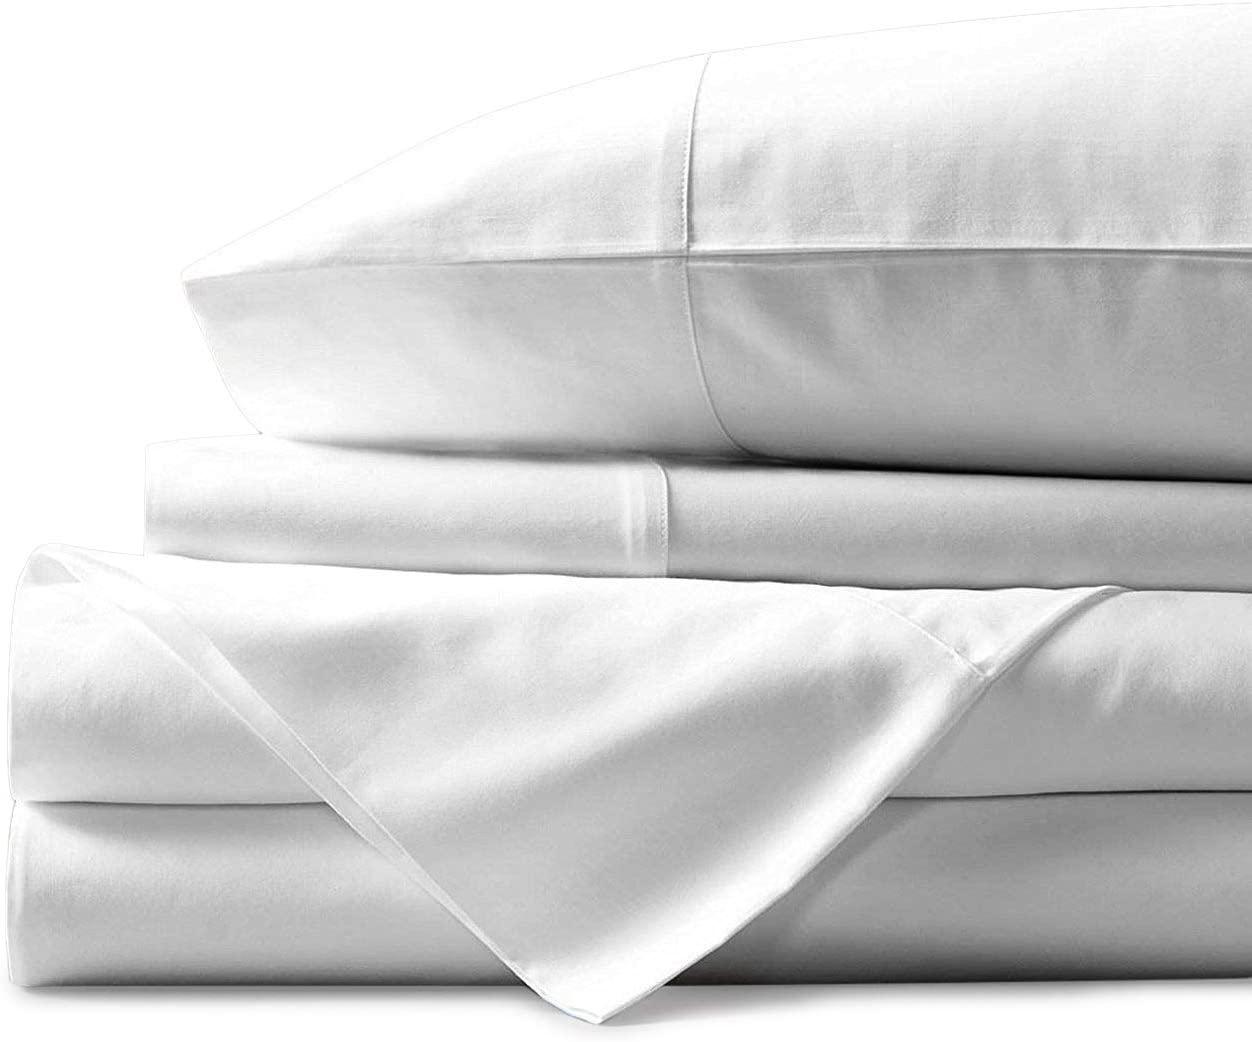 Mayfair Linen Cotton White King Bed Sheets Set for $44.99 Shipped